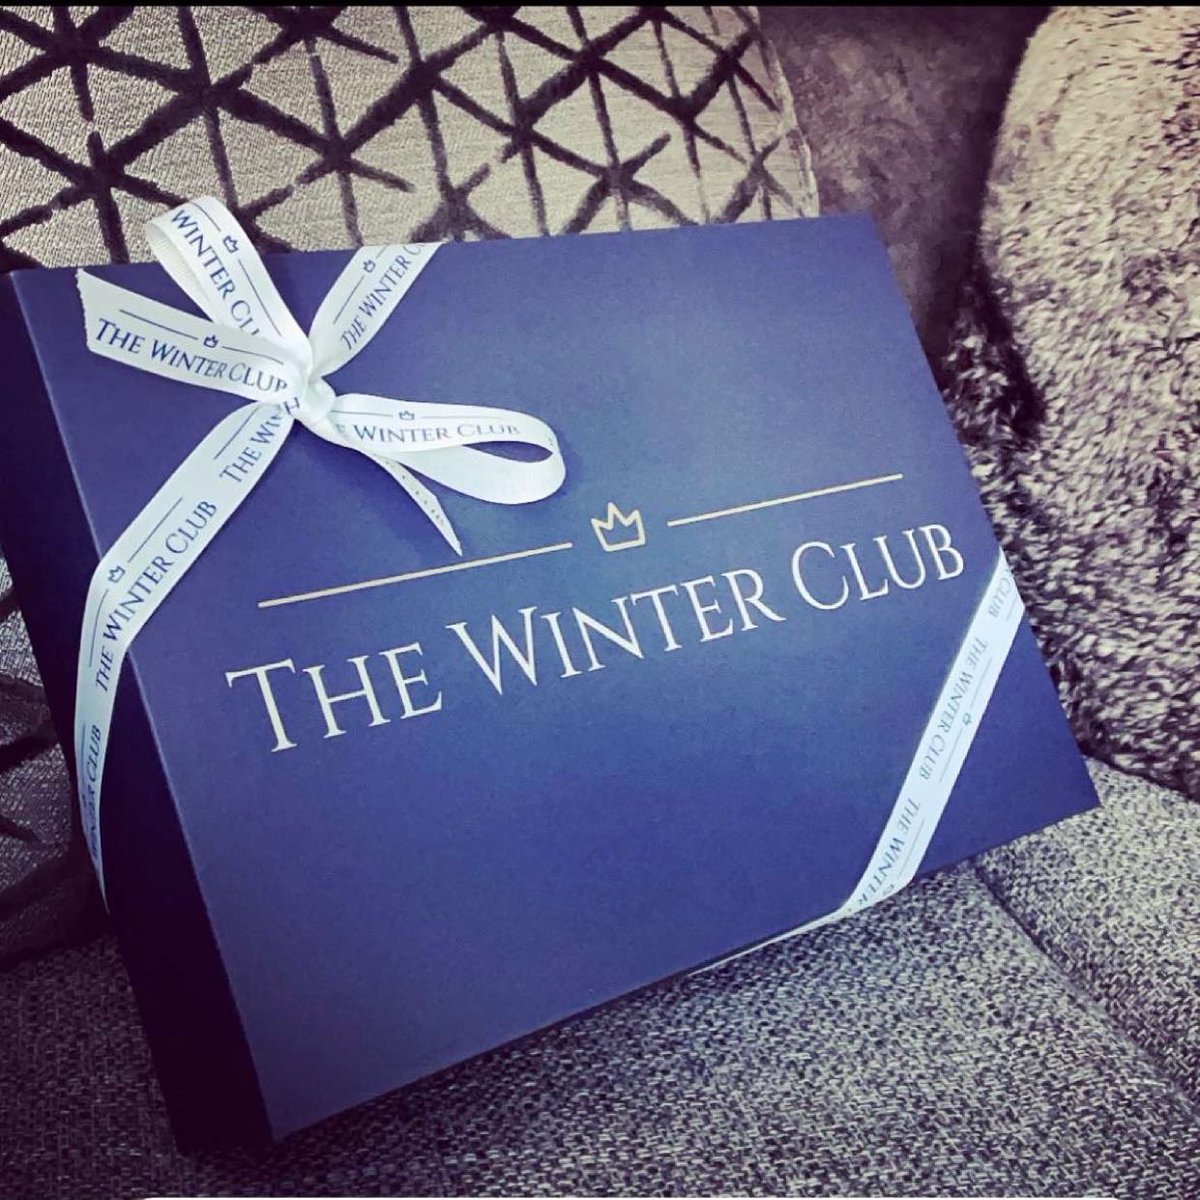 The Winter Club, for all your personalised sleepwear ✨ there’s something for everyone 🤍 #personalisedgifts #embroidery #luxurysleepwear #satinpyjamas #birthday #bride #babyshower #selfcare #newbusiness #SmallBusiness #London #fashion #influencers #InfluencerMarketing